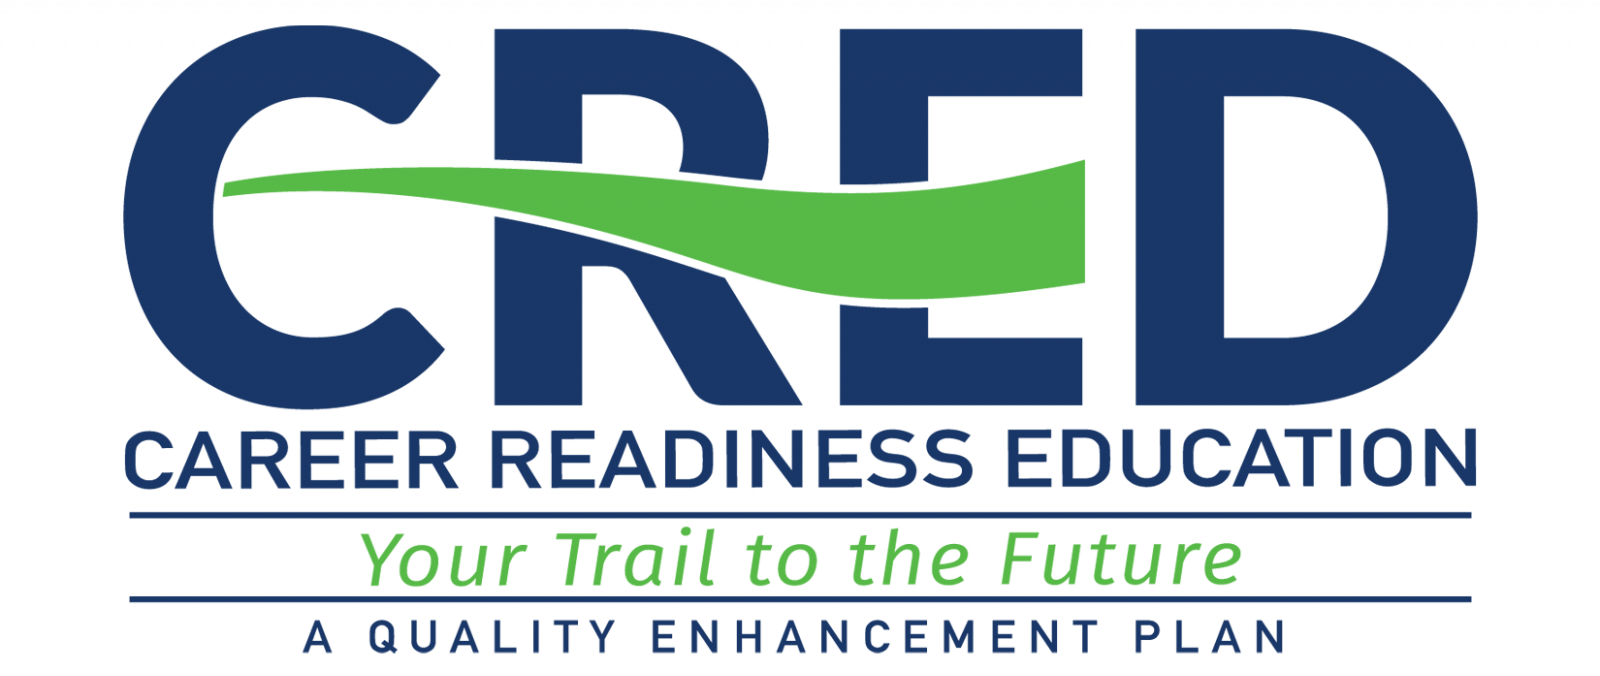 Career Readiness Education Banner